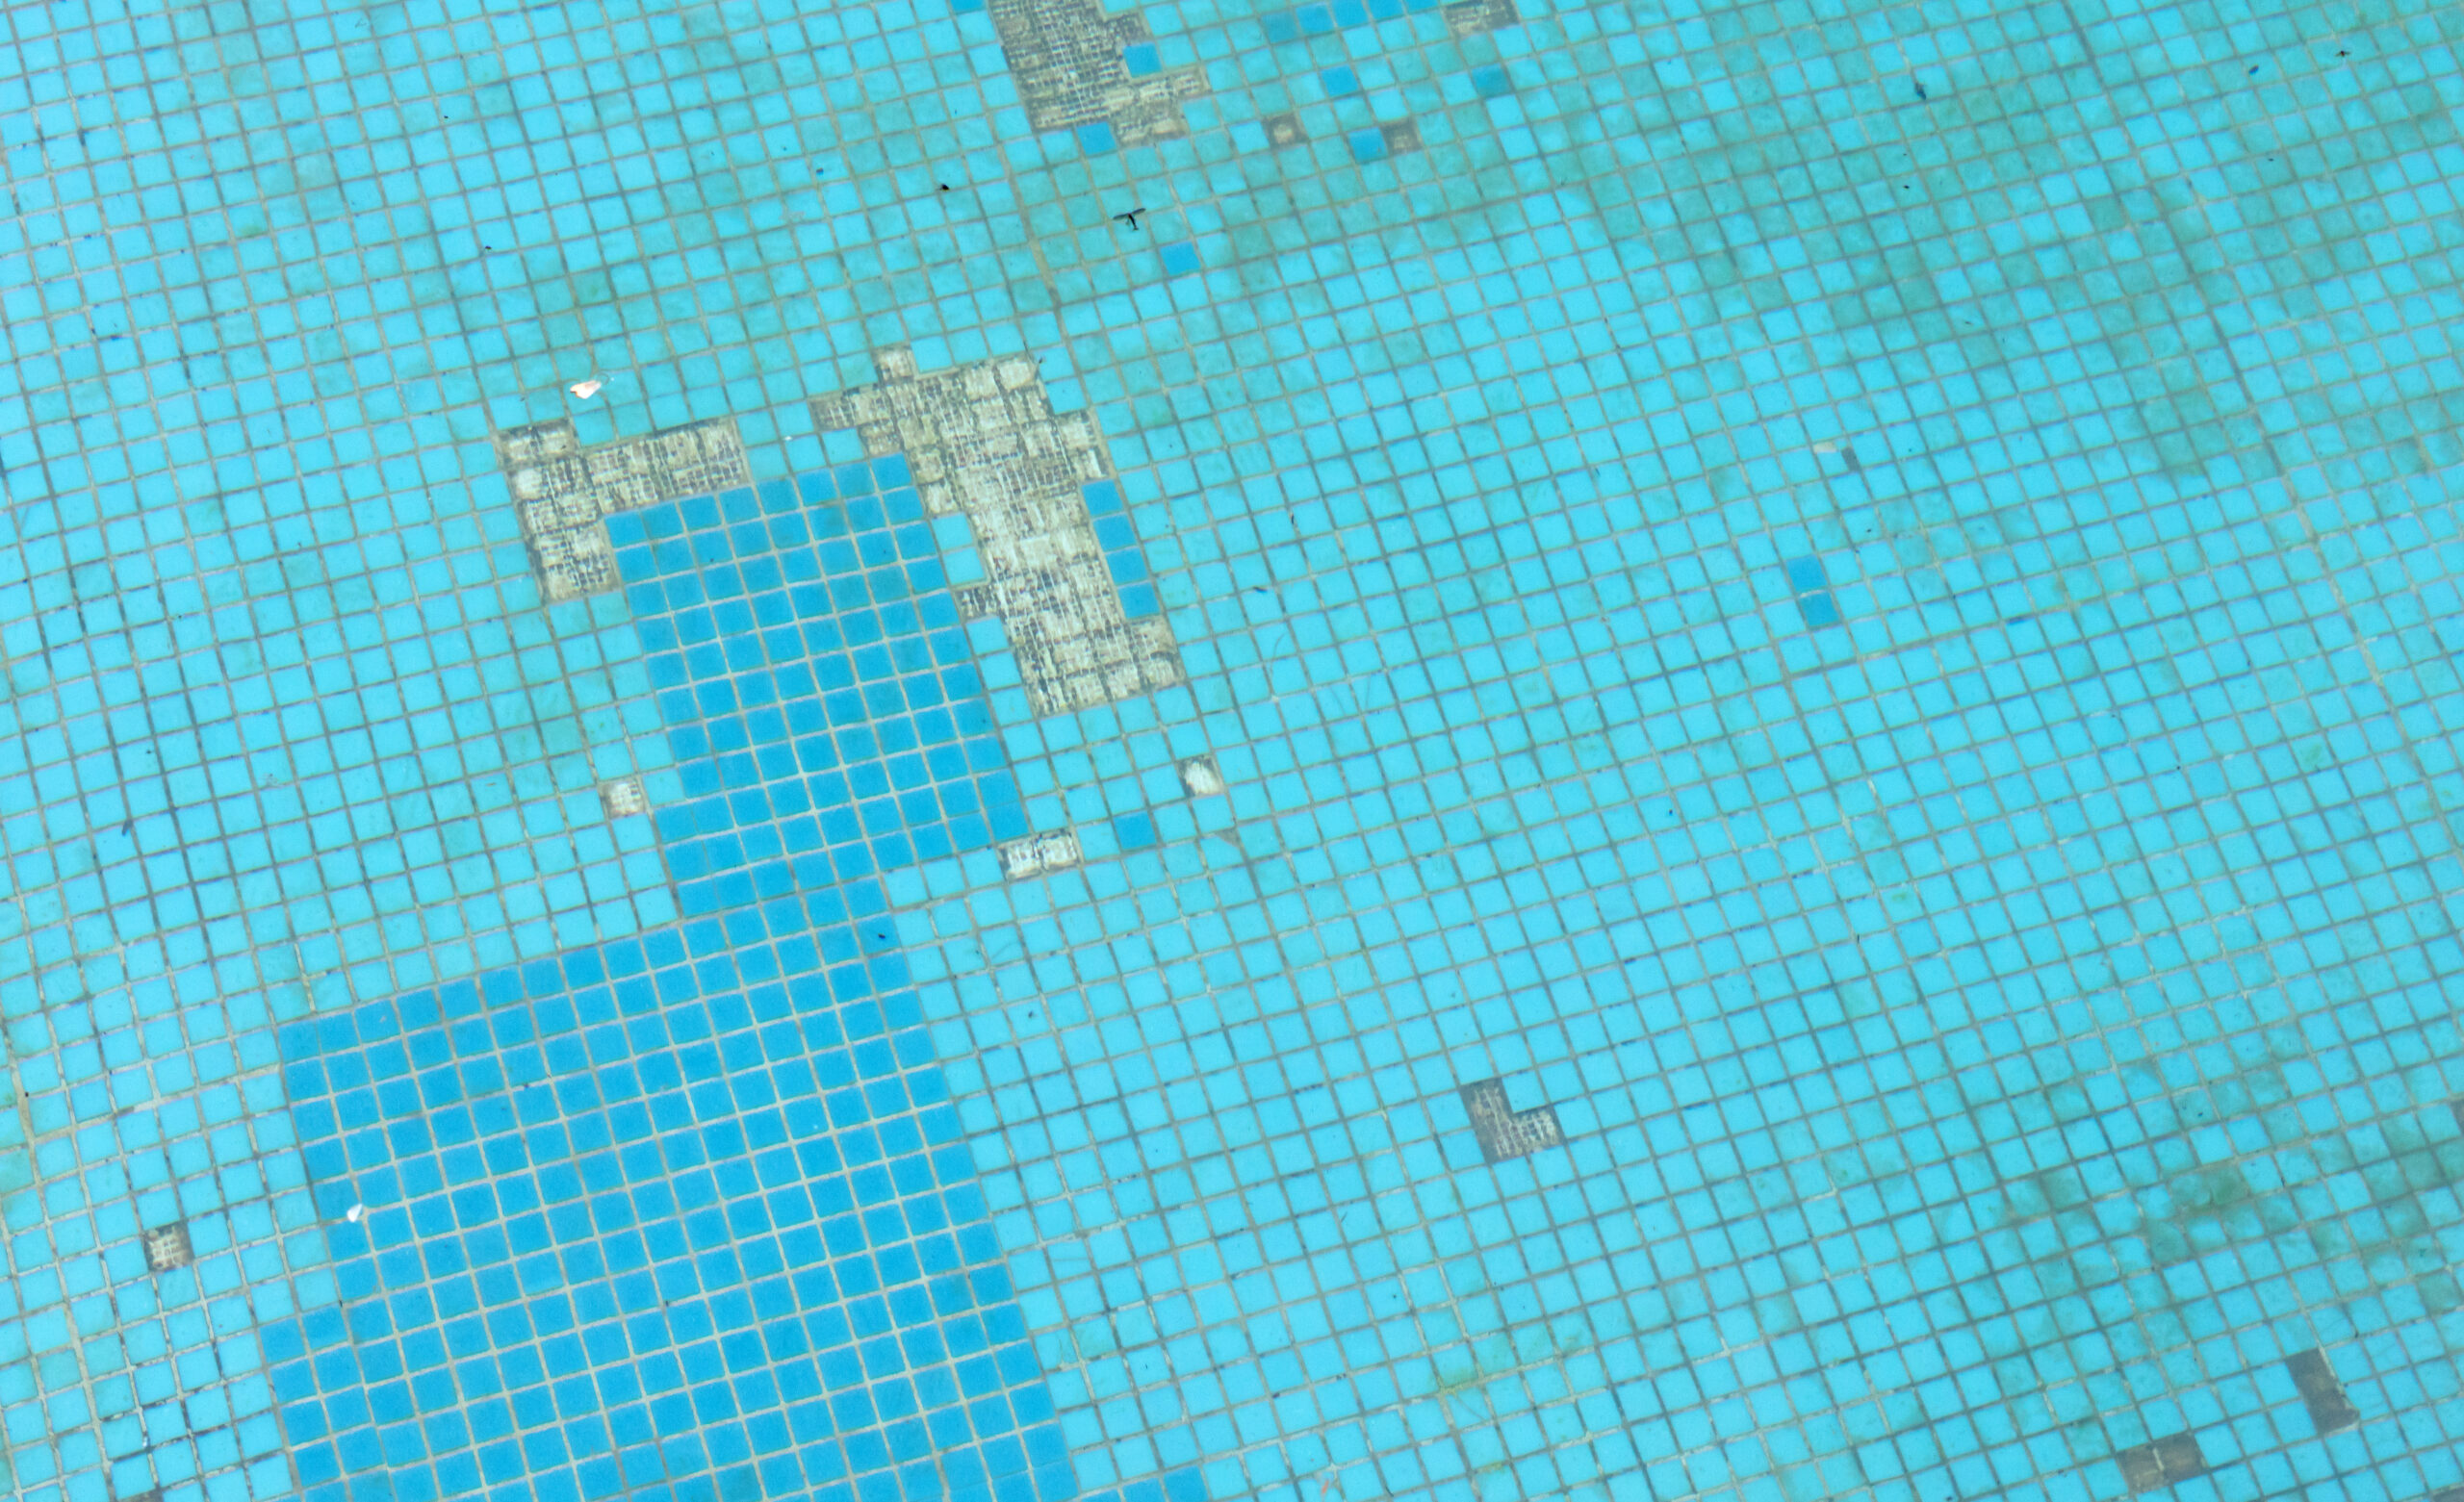 Cracked tiles in a pool, showing signs of wear and tear, which may require maintenance or repair.